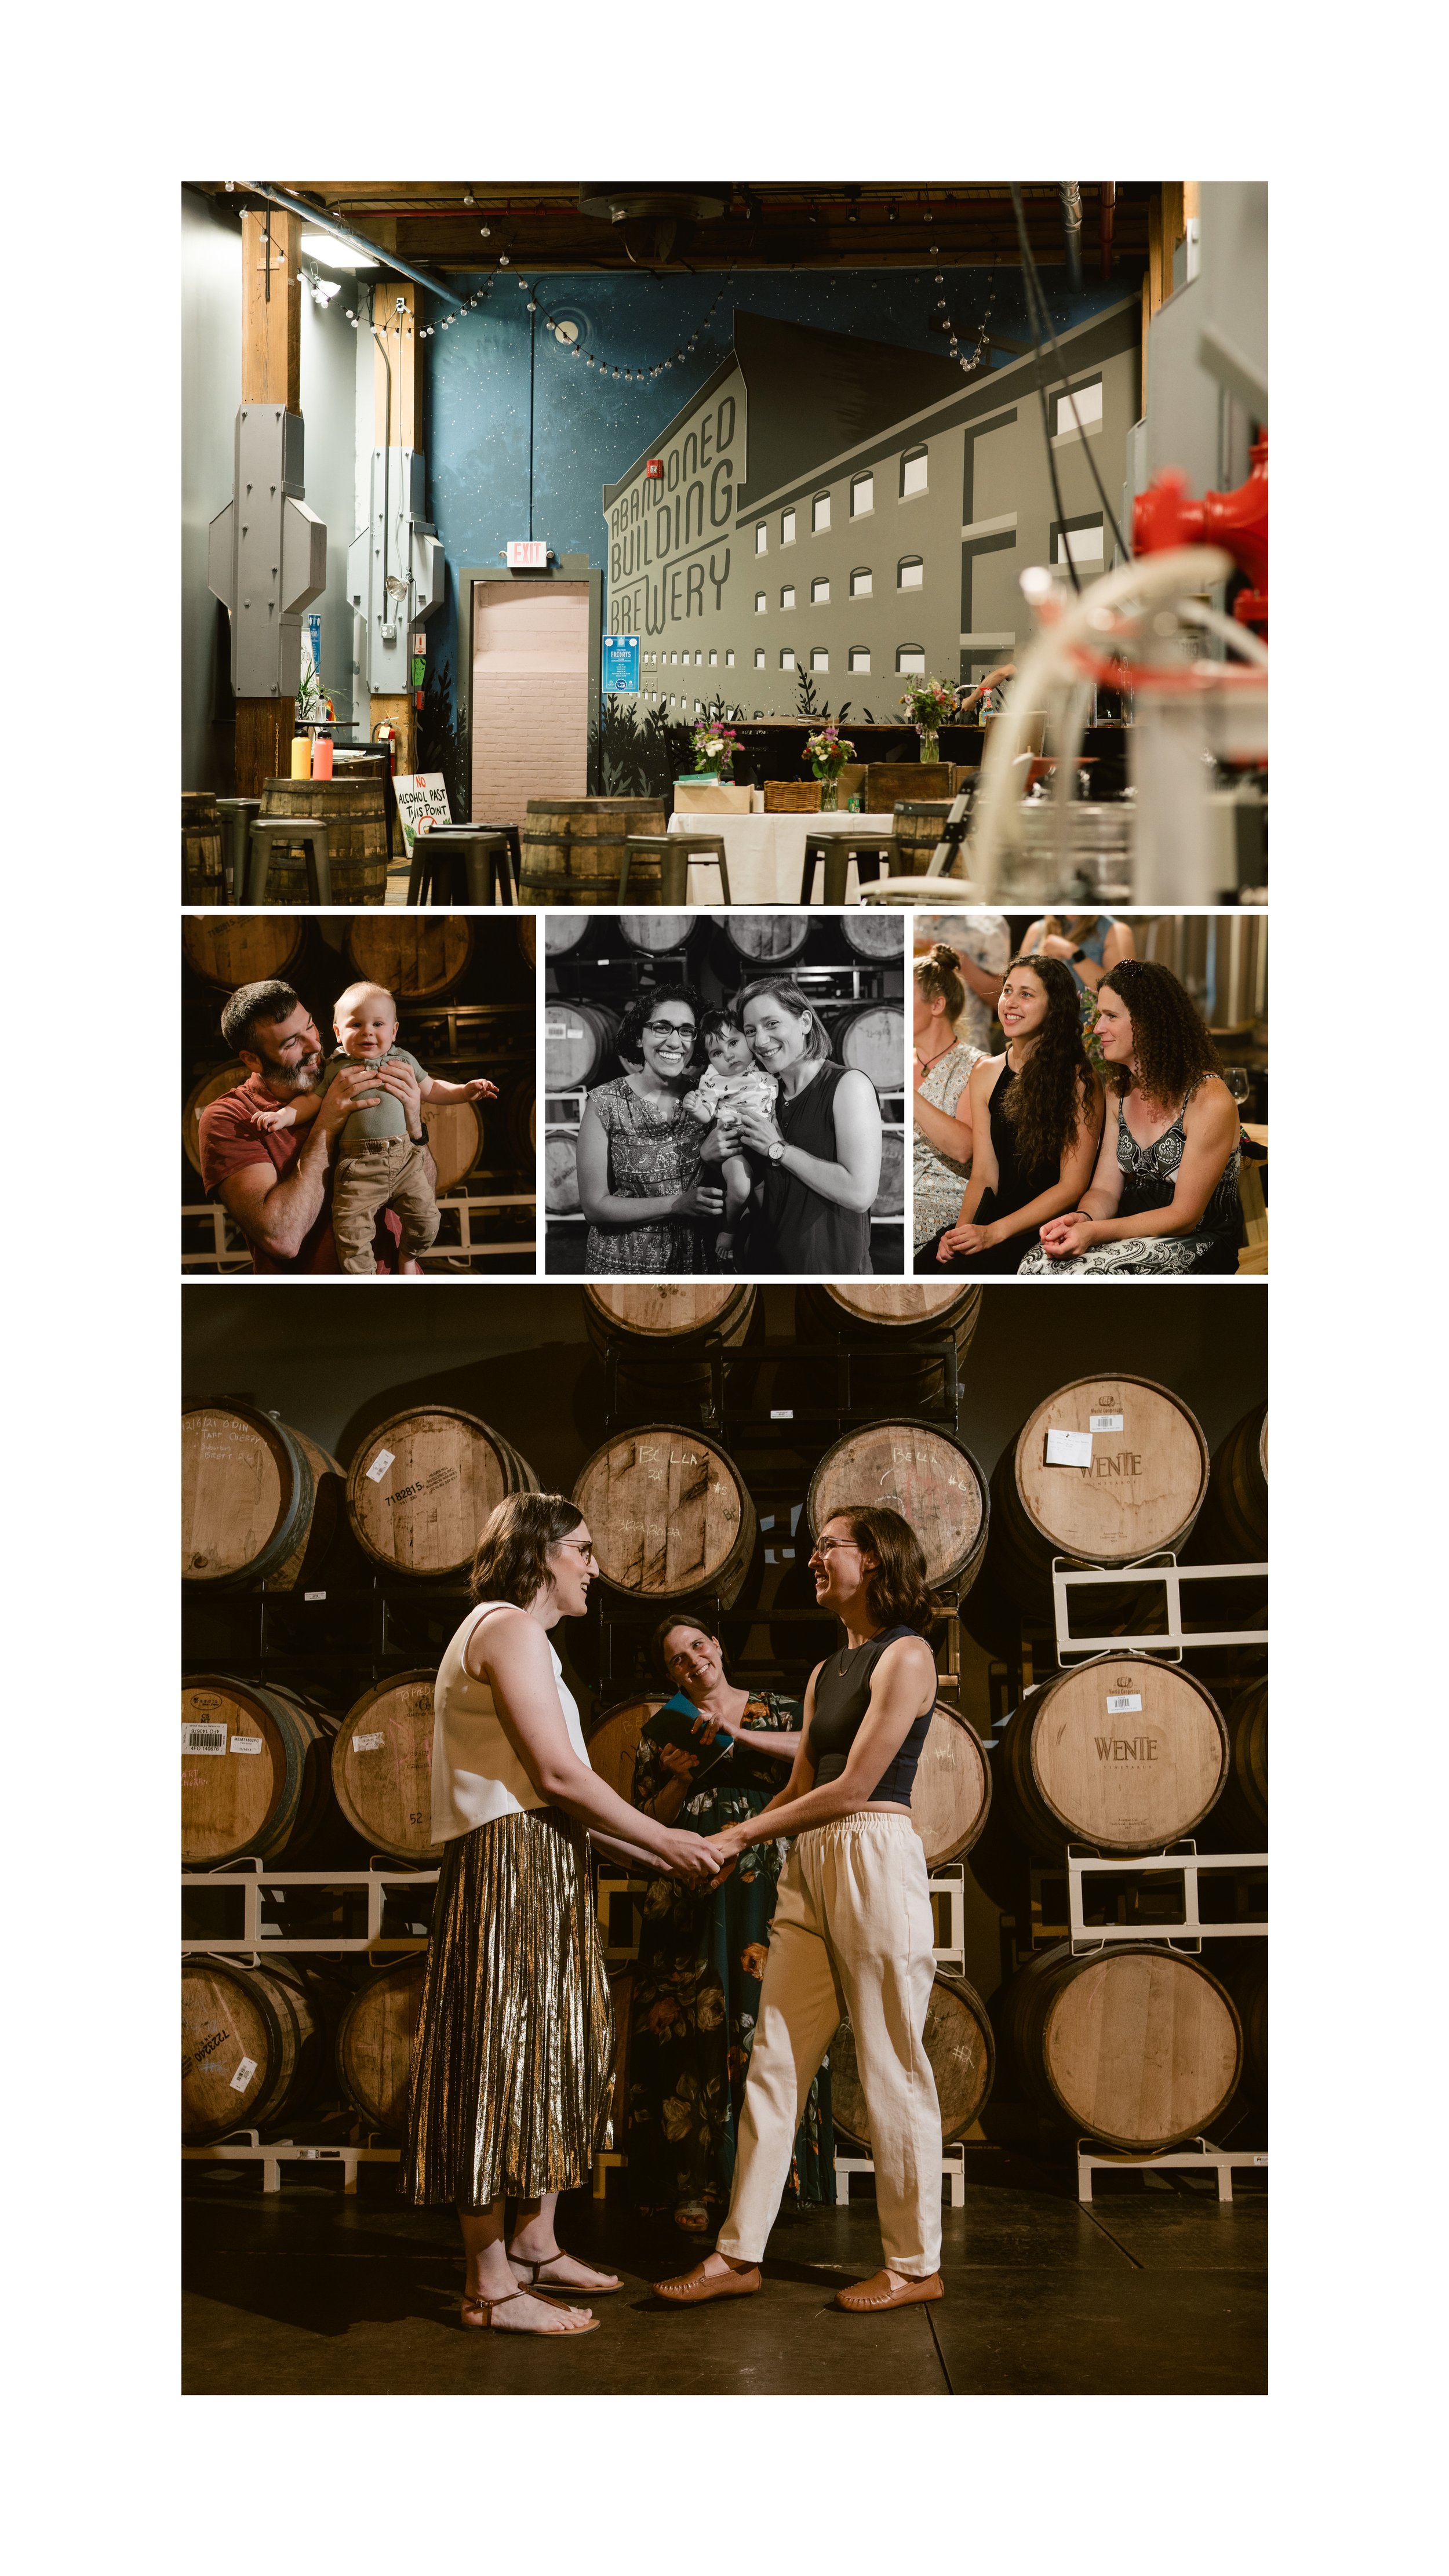 westernMA_wedding_abandoned_building_brewery_photography_paulette_griswold_novella00003.jpg